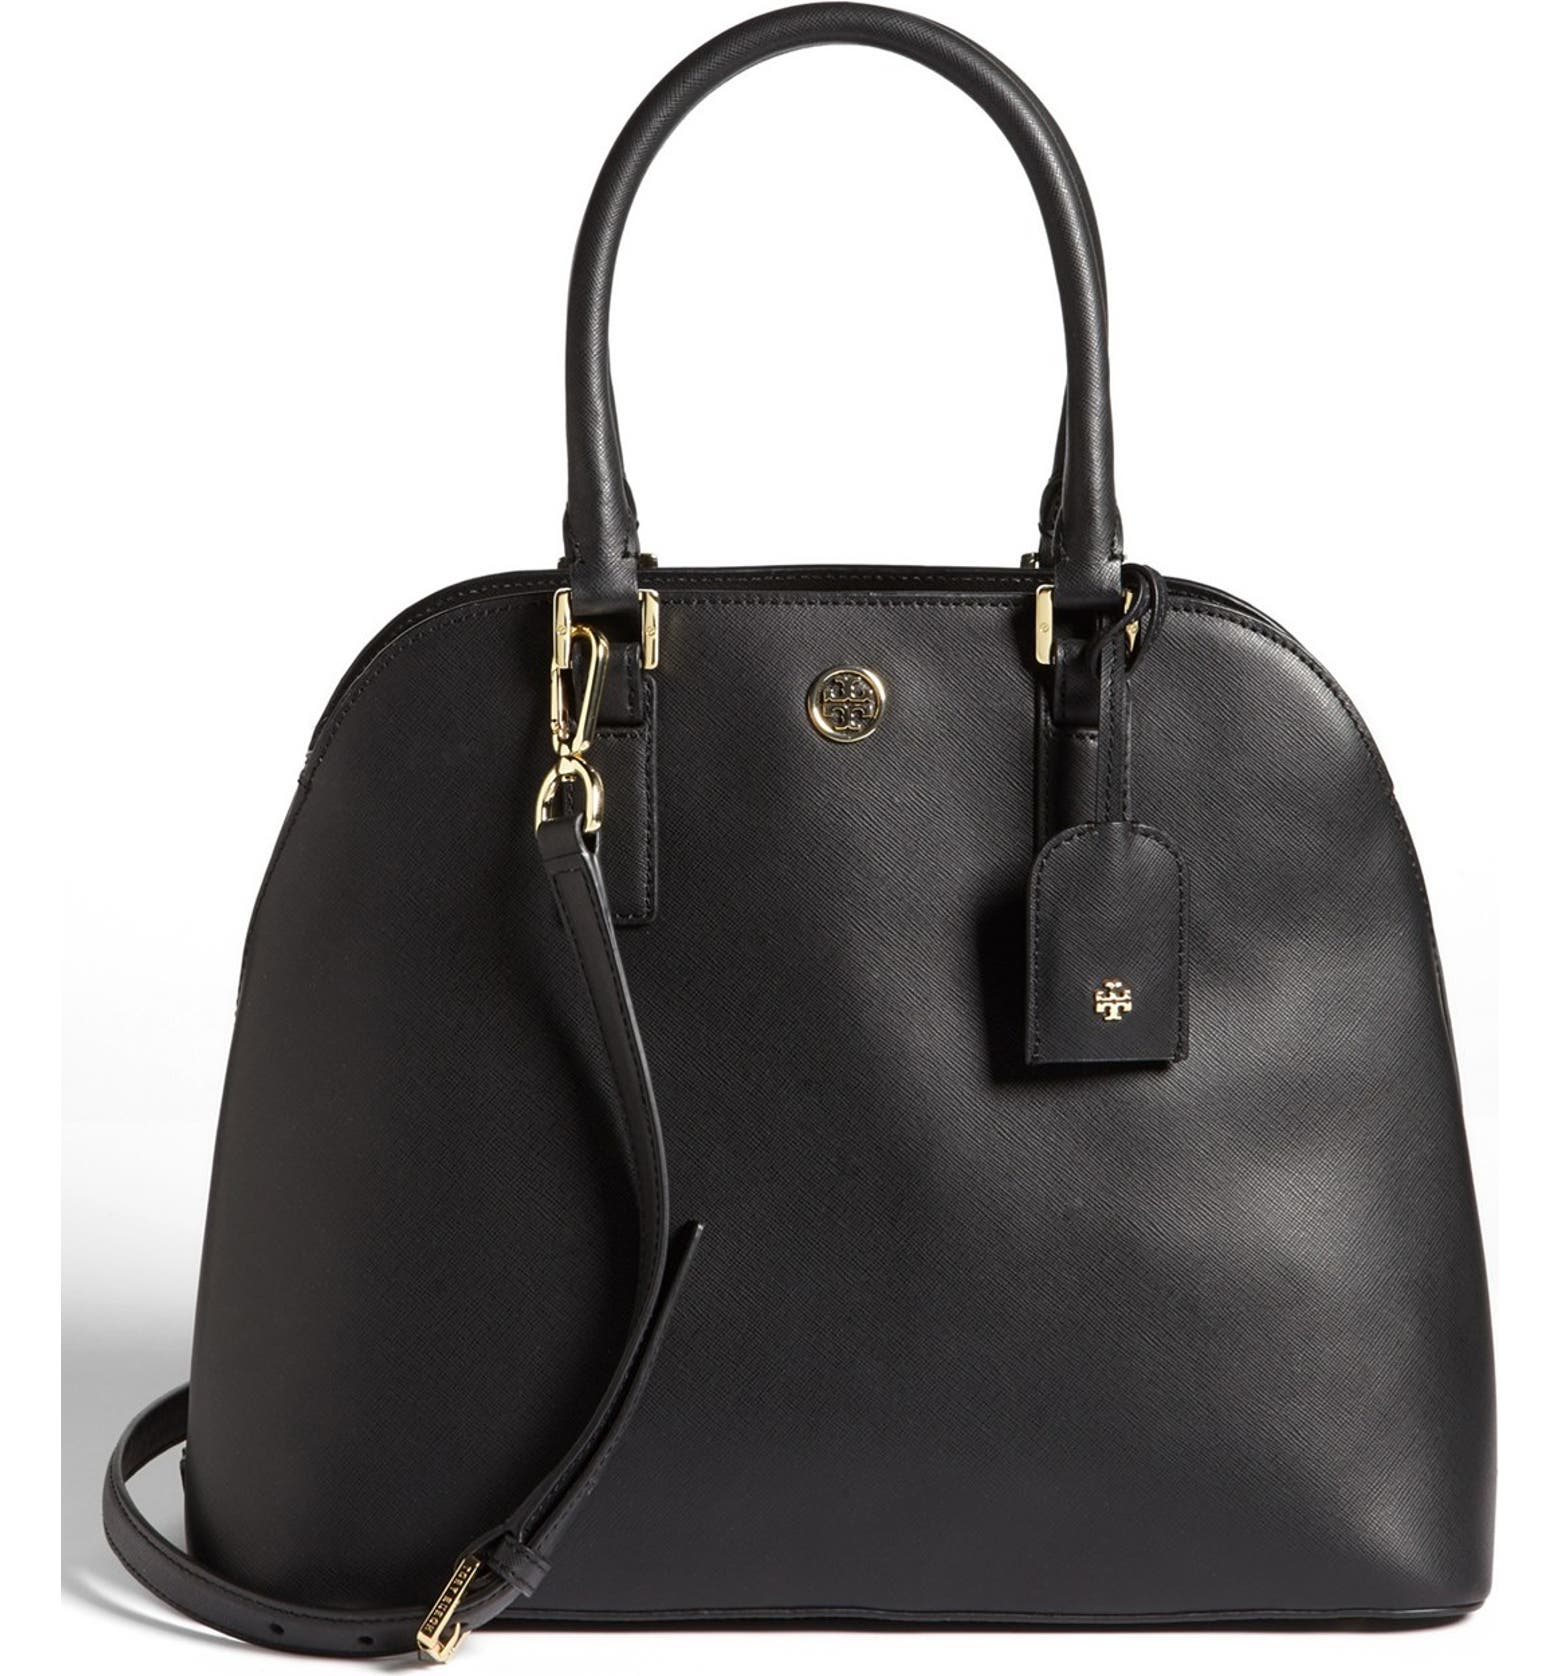 Tory Burch 'Robinson' Open Dome Satchel | Nordstrom